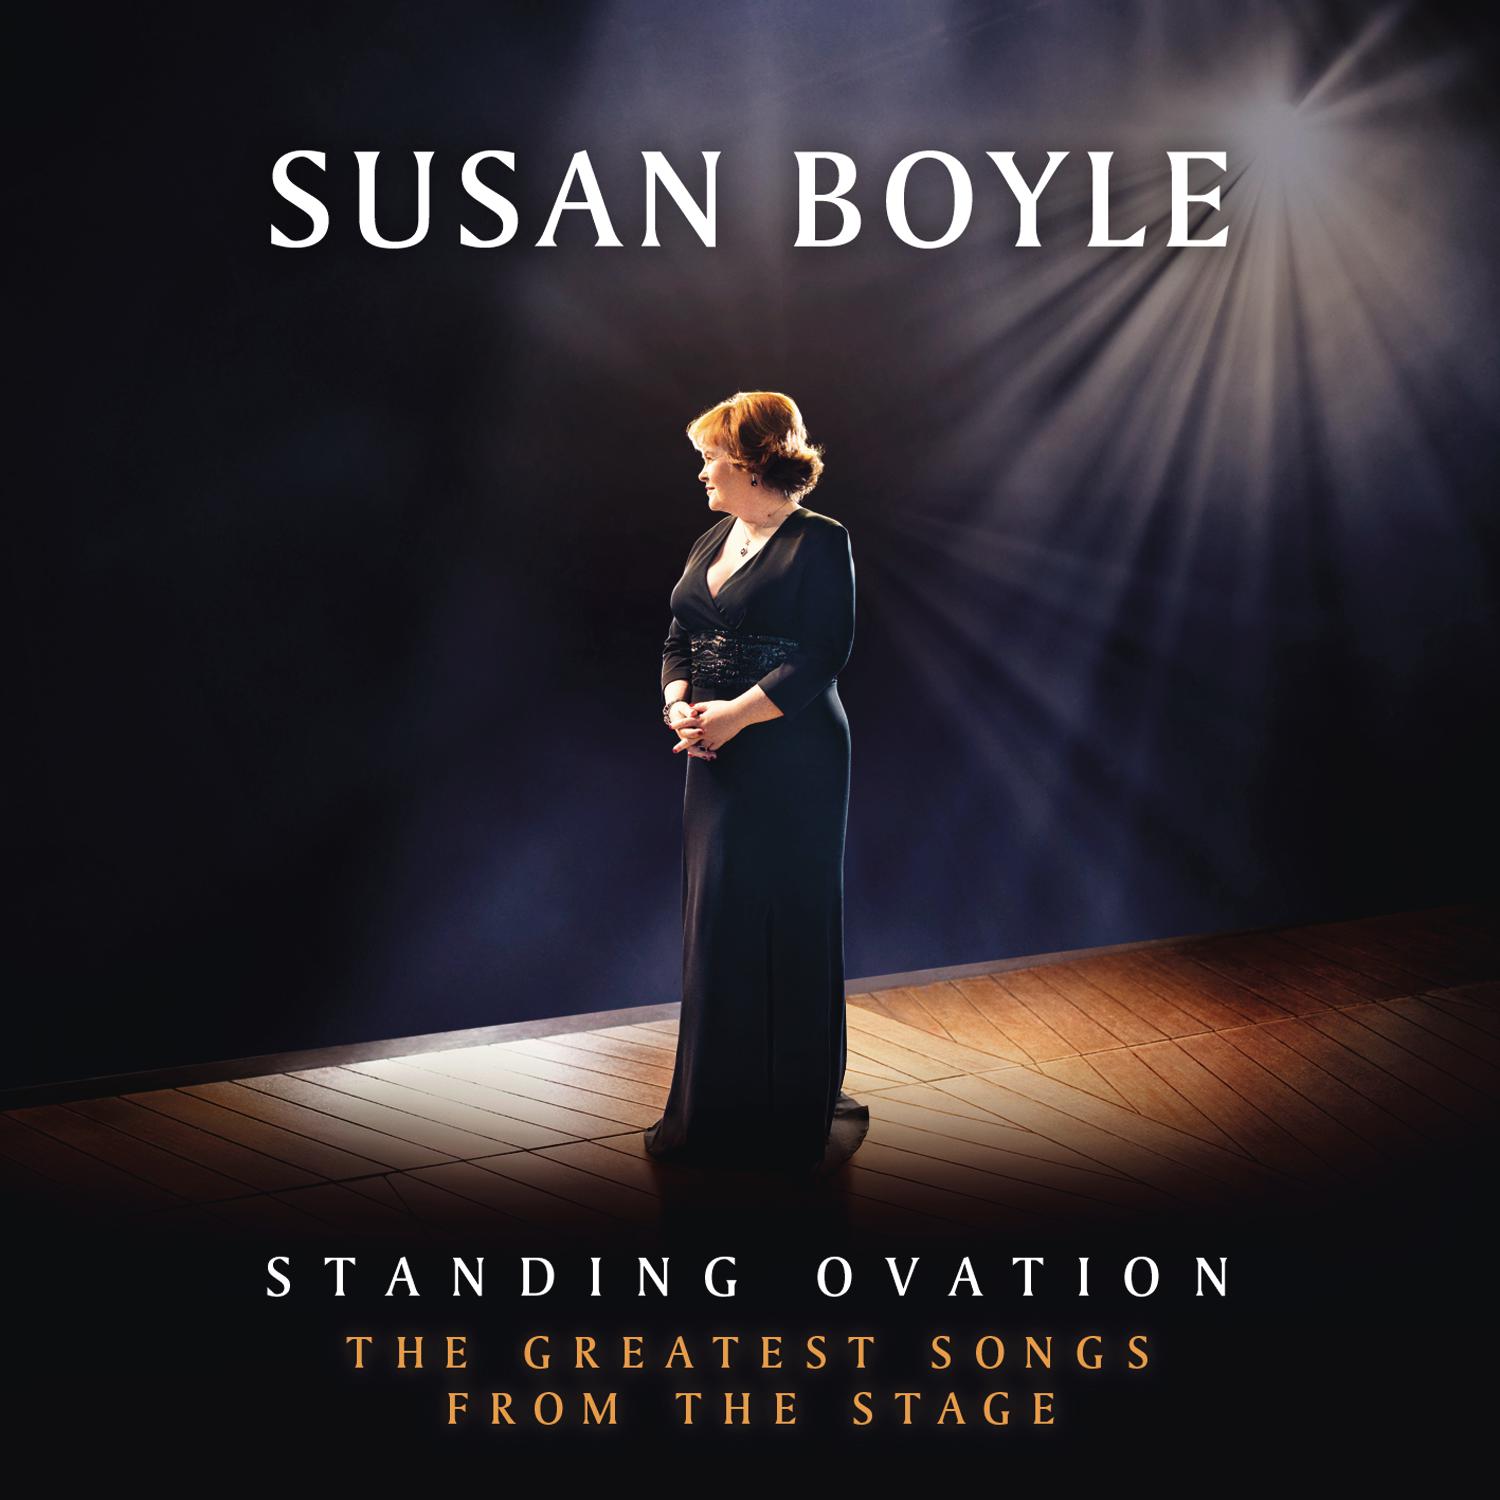 Standing Ovation: The Greatest Songs From The Stage